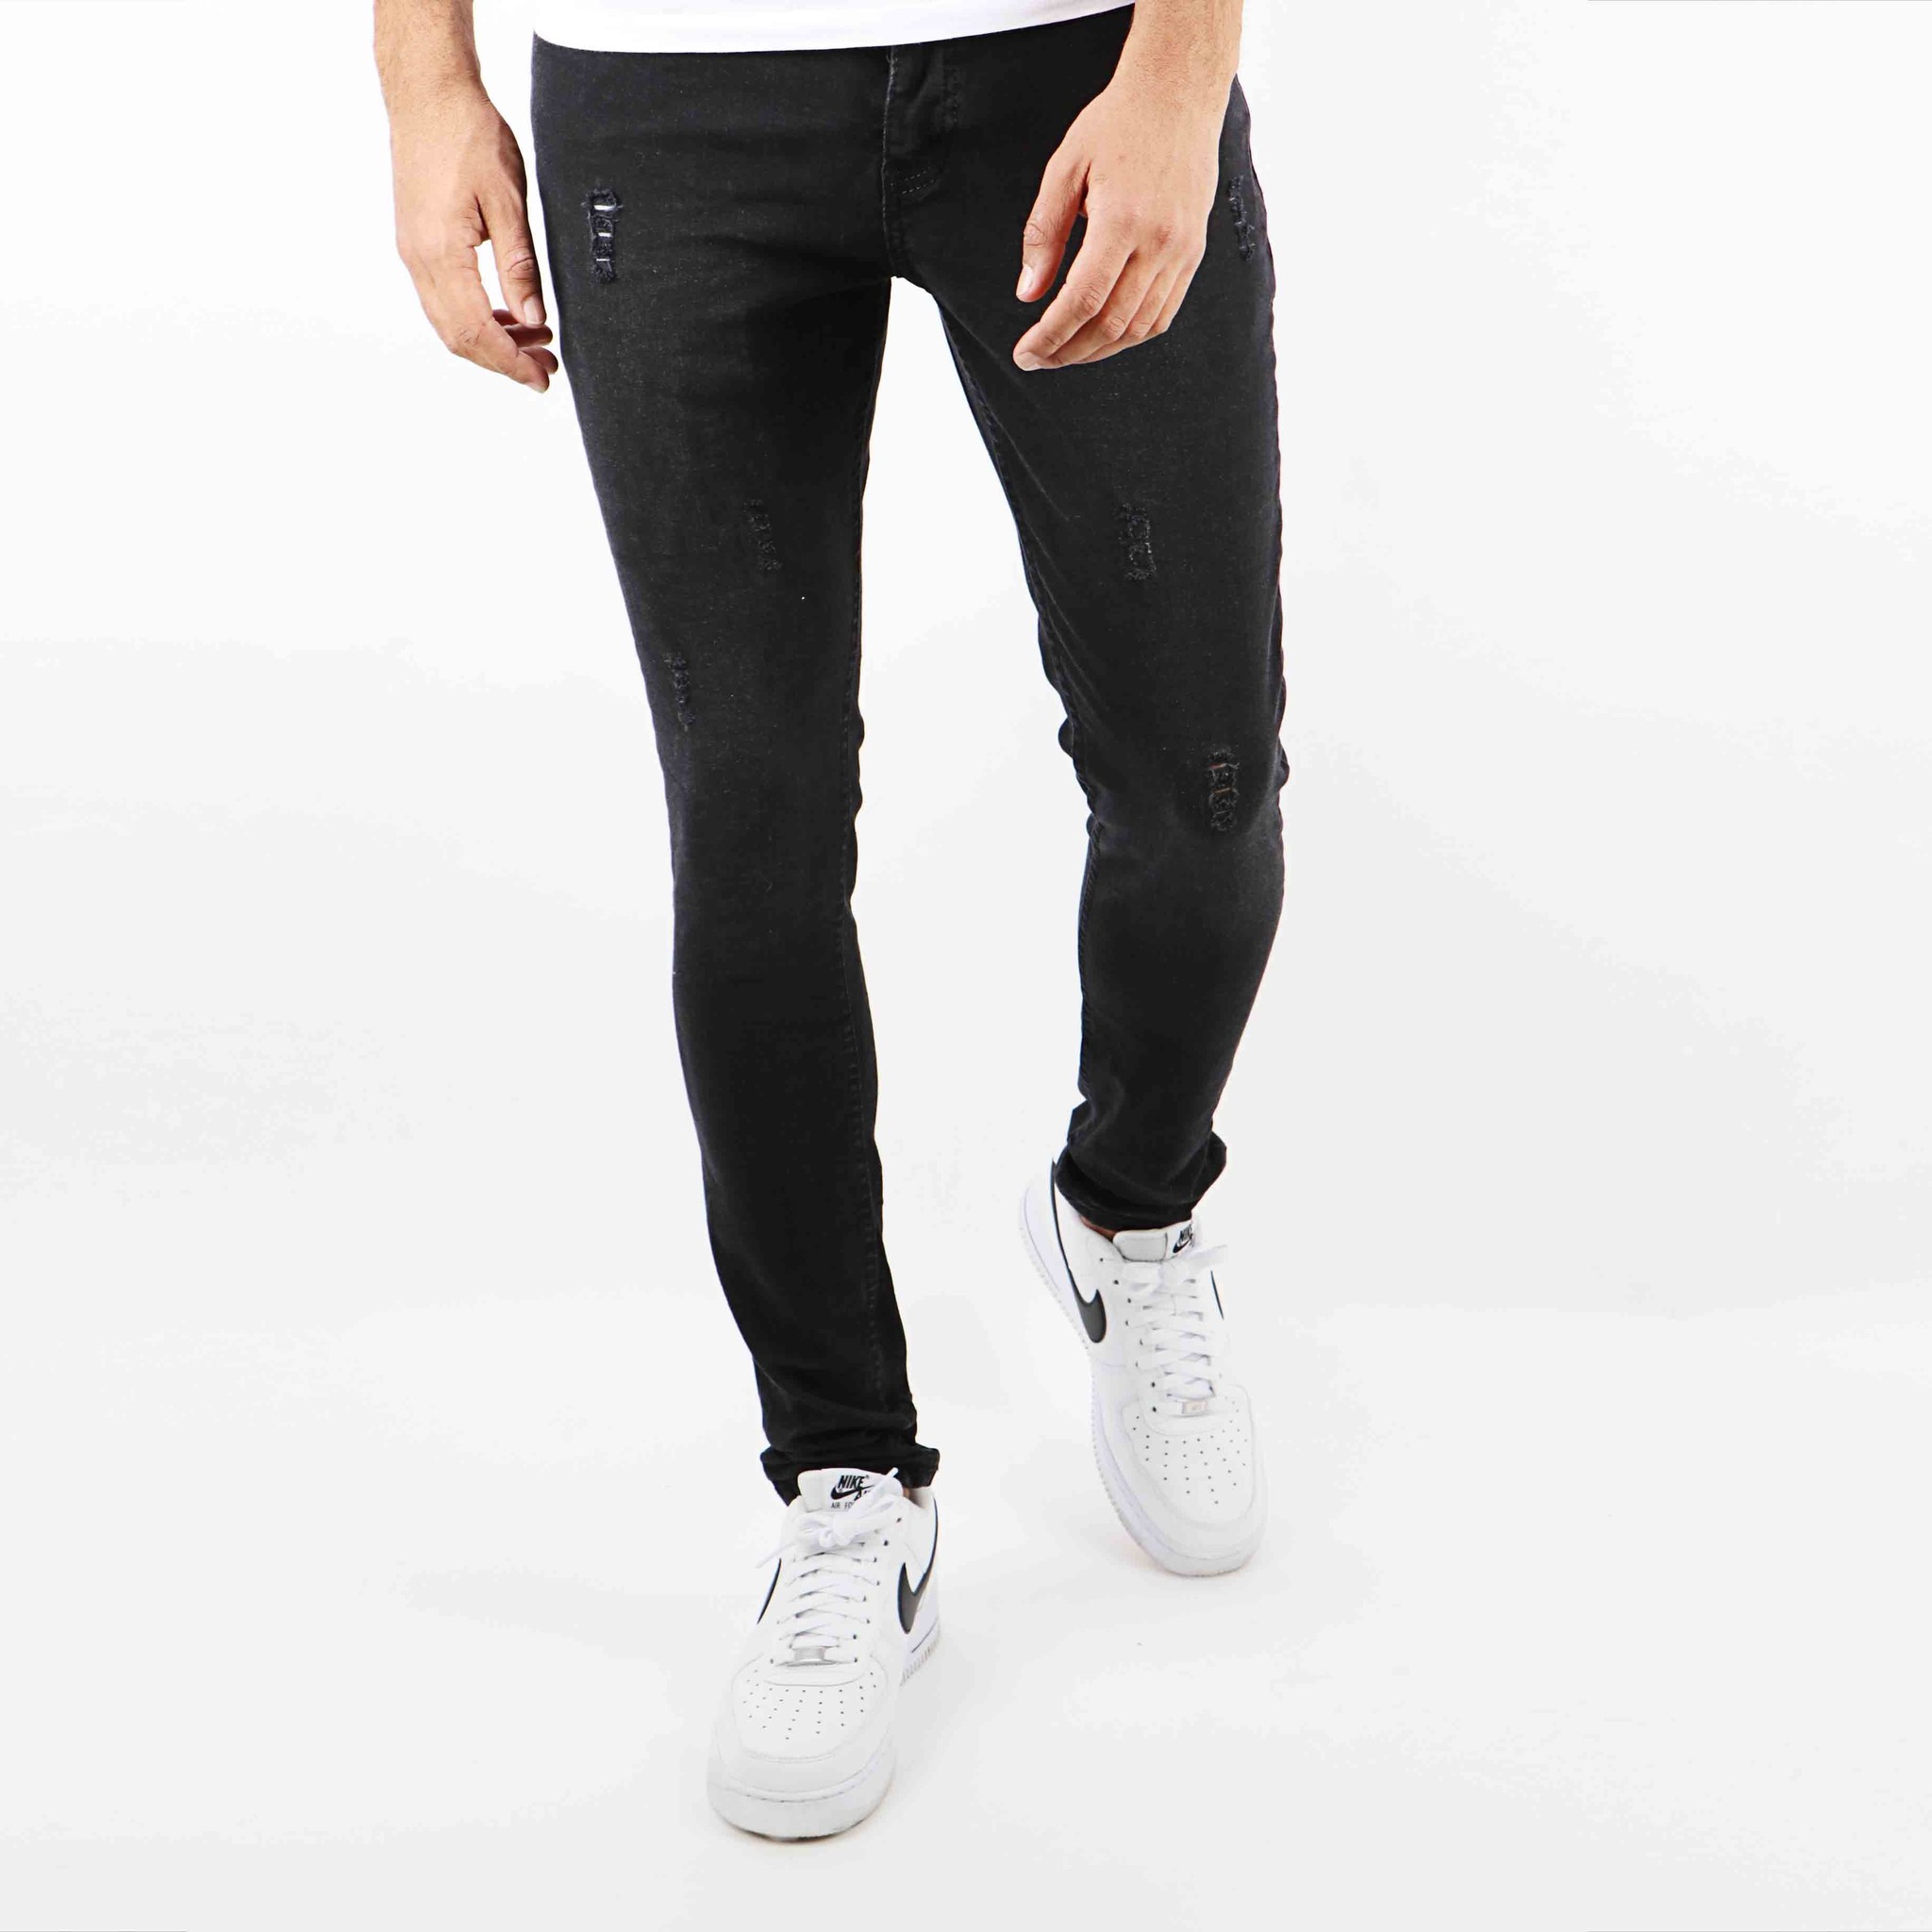 Opstand Hobart arm Zwarte Skinny Jeans Heren Stretch Shop, SAVE 48% - icarus.photos